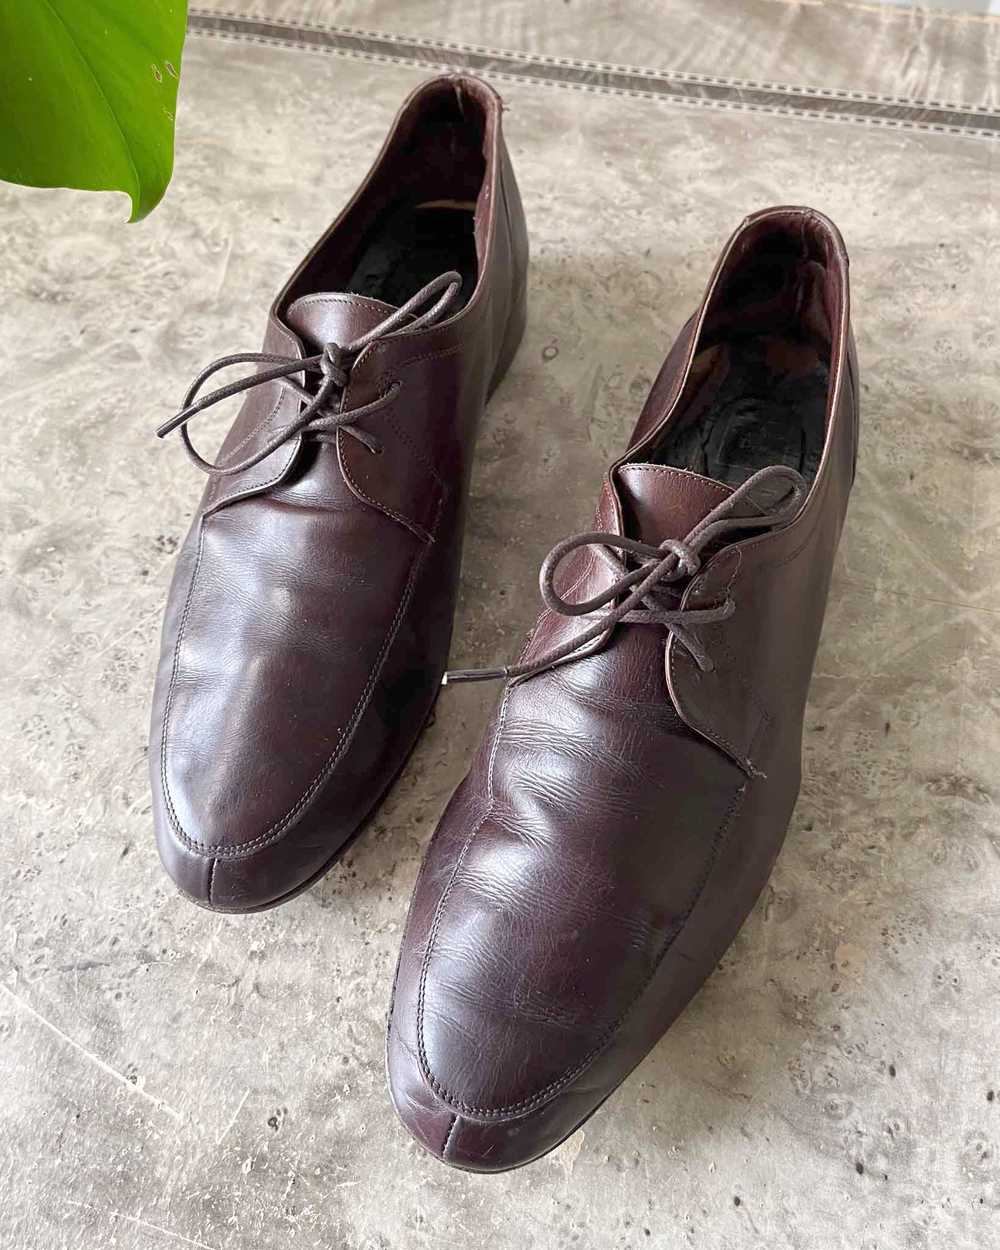 80s Dior Brown Leather Oxfords - image 2